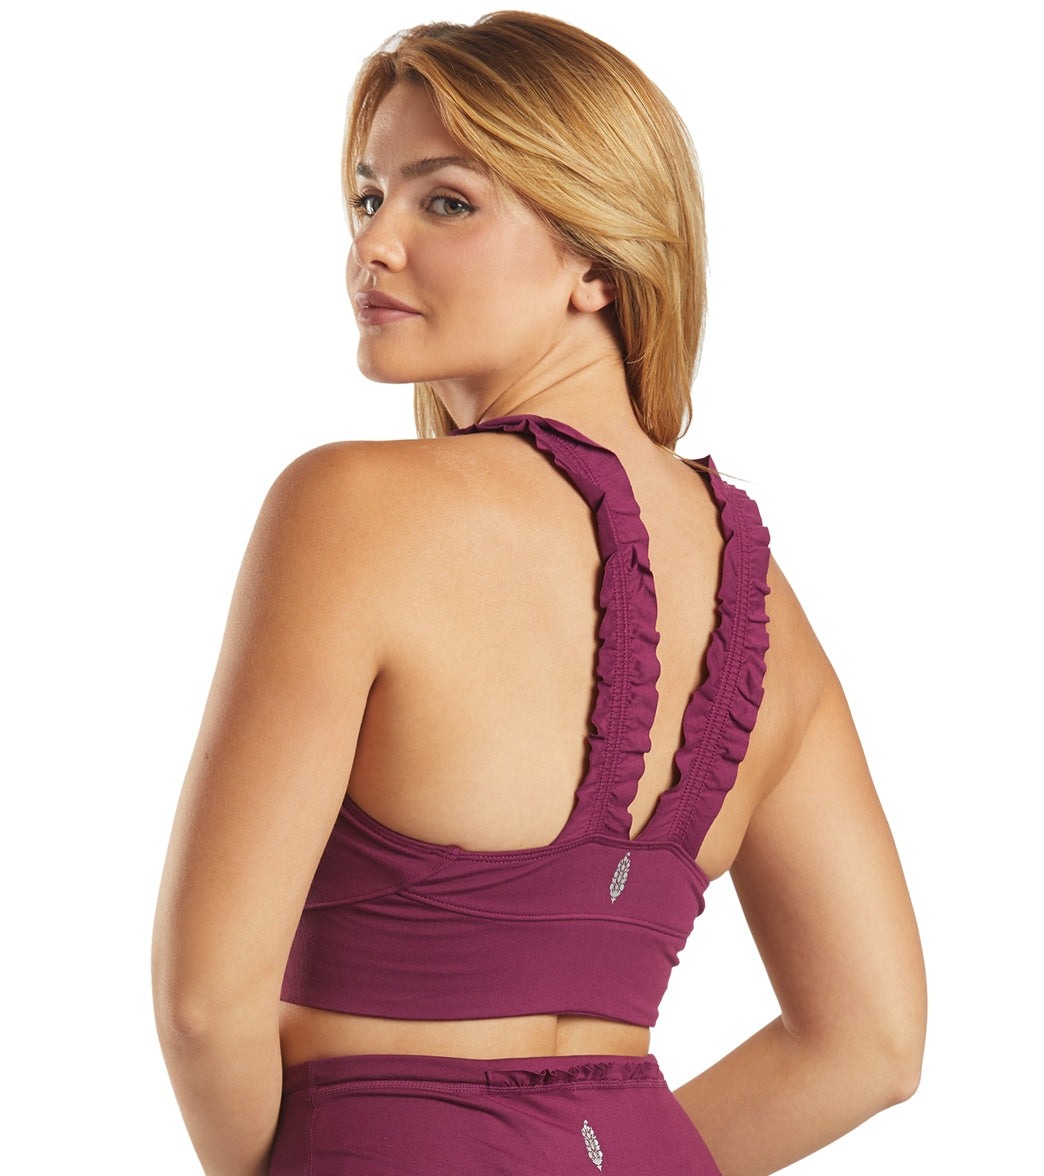 Free People Stay Centered Bra at YogaOutlet.com - Free Shipping